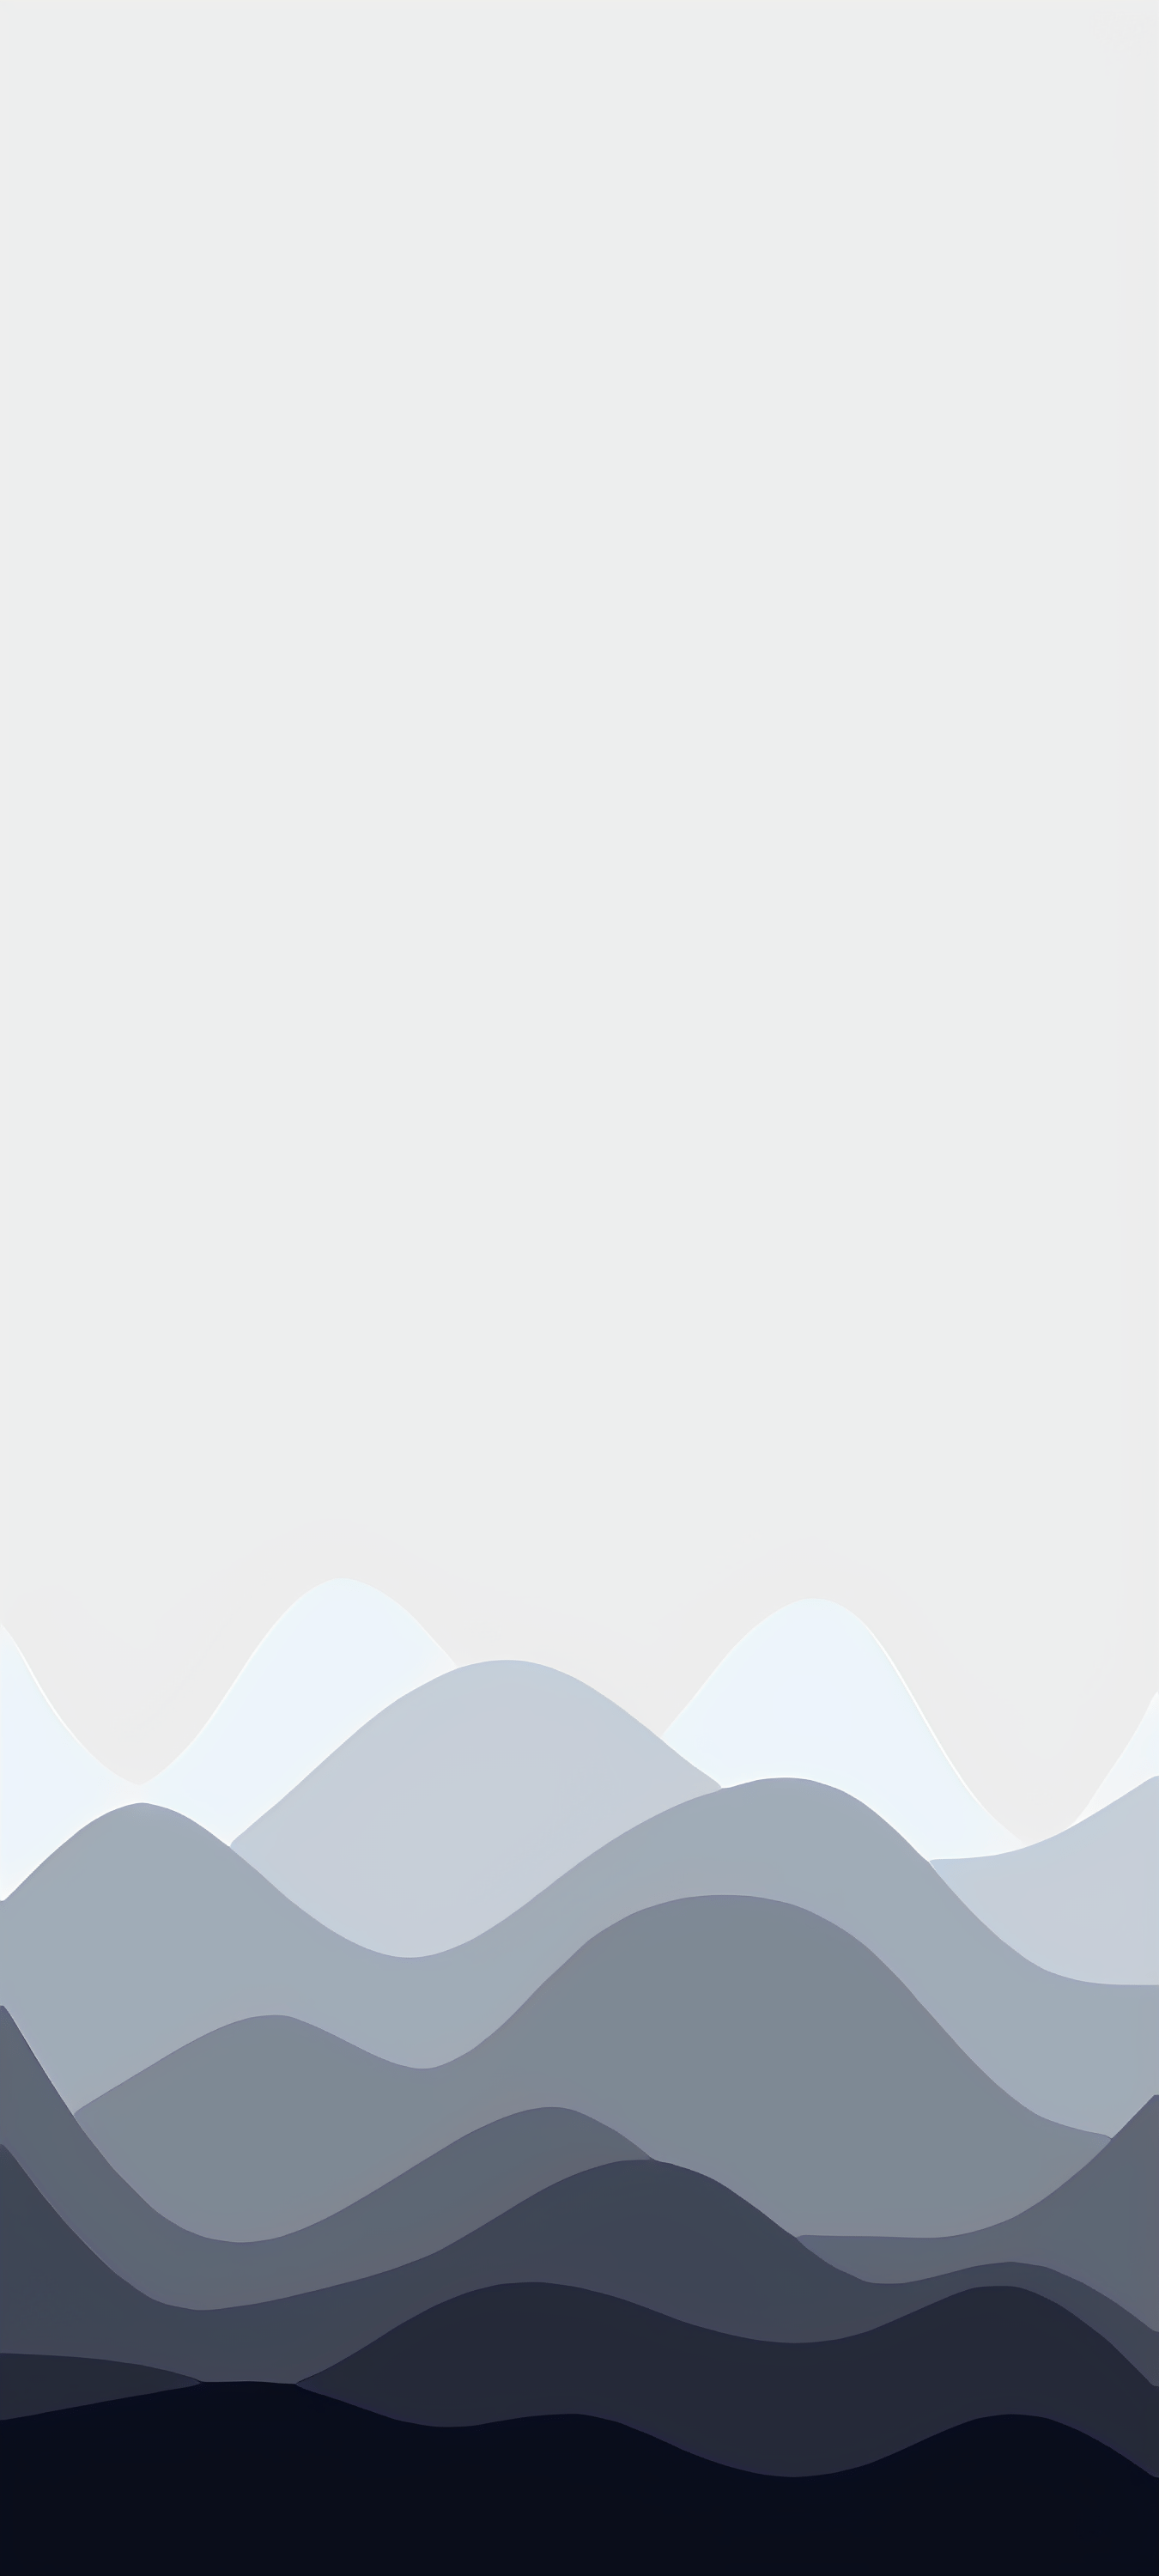 Minimalist Wave Wallpapers - Top Free Minimalist Wave Backgrounds ...